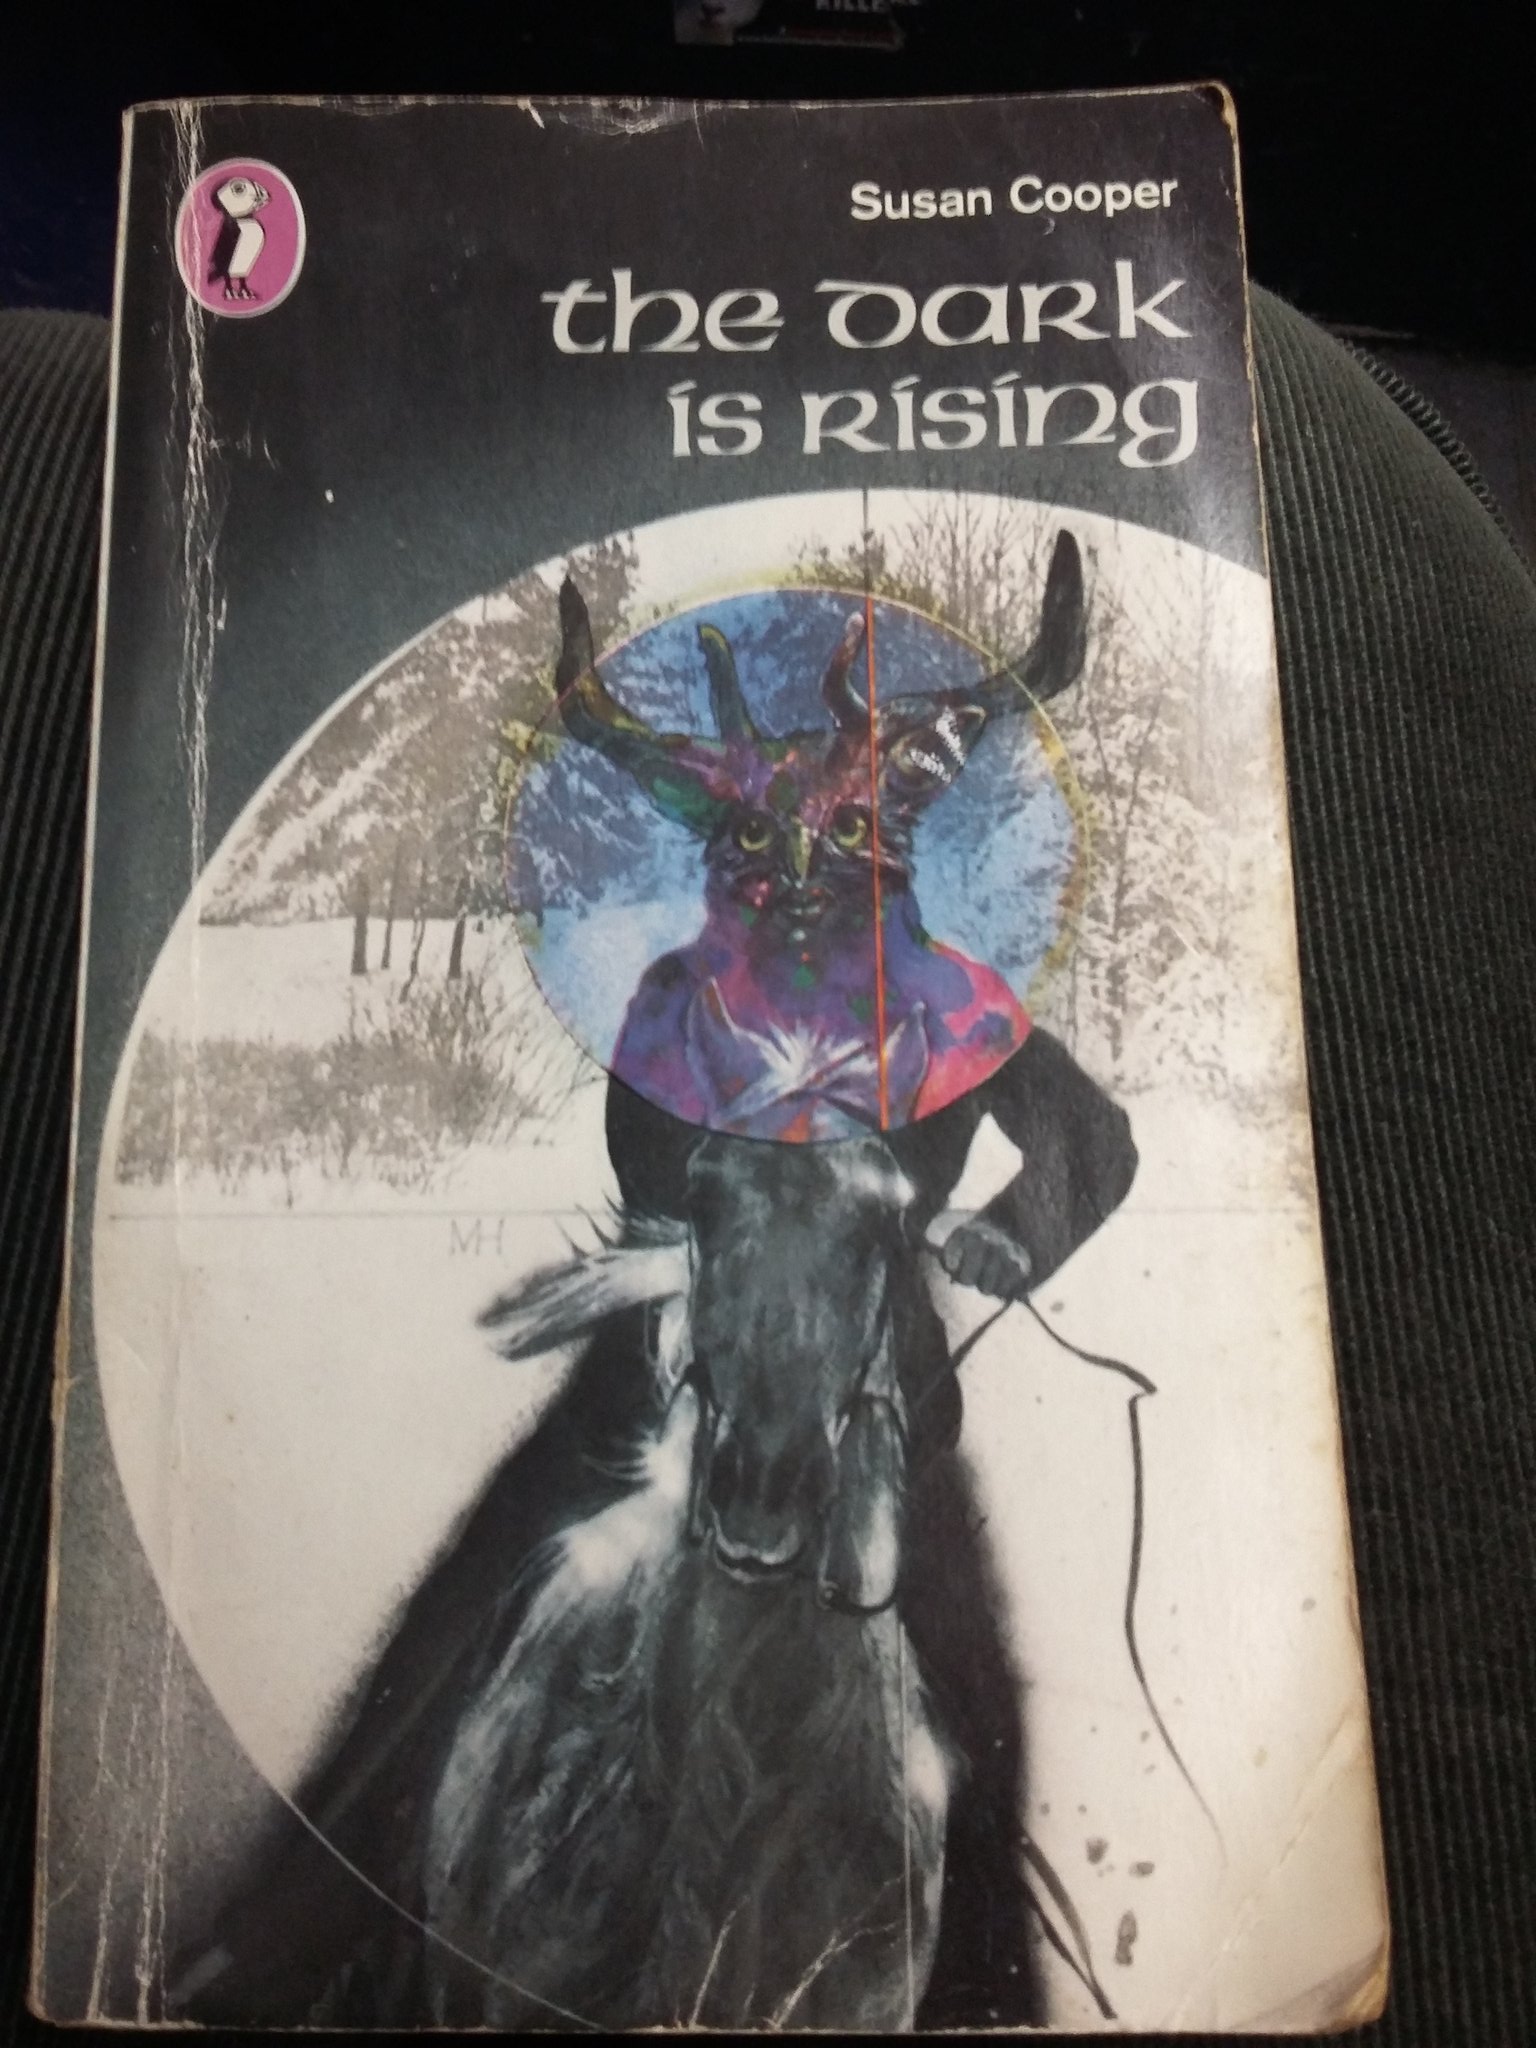 After a day of being online at #SocMedHE17 I feel I should stay offline on the way home and re-read a seasonal classic - hoping it doesn't fall apart completely before I finish... #TheDarkIsReading https://t.co/74RAHSlBhq